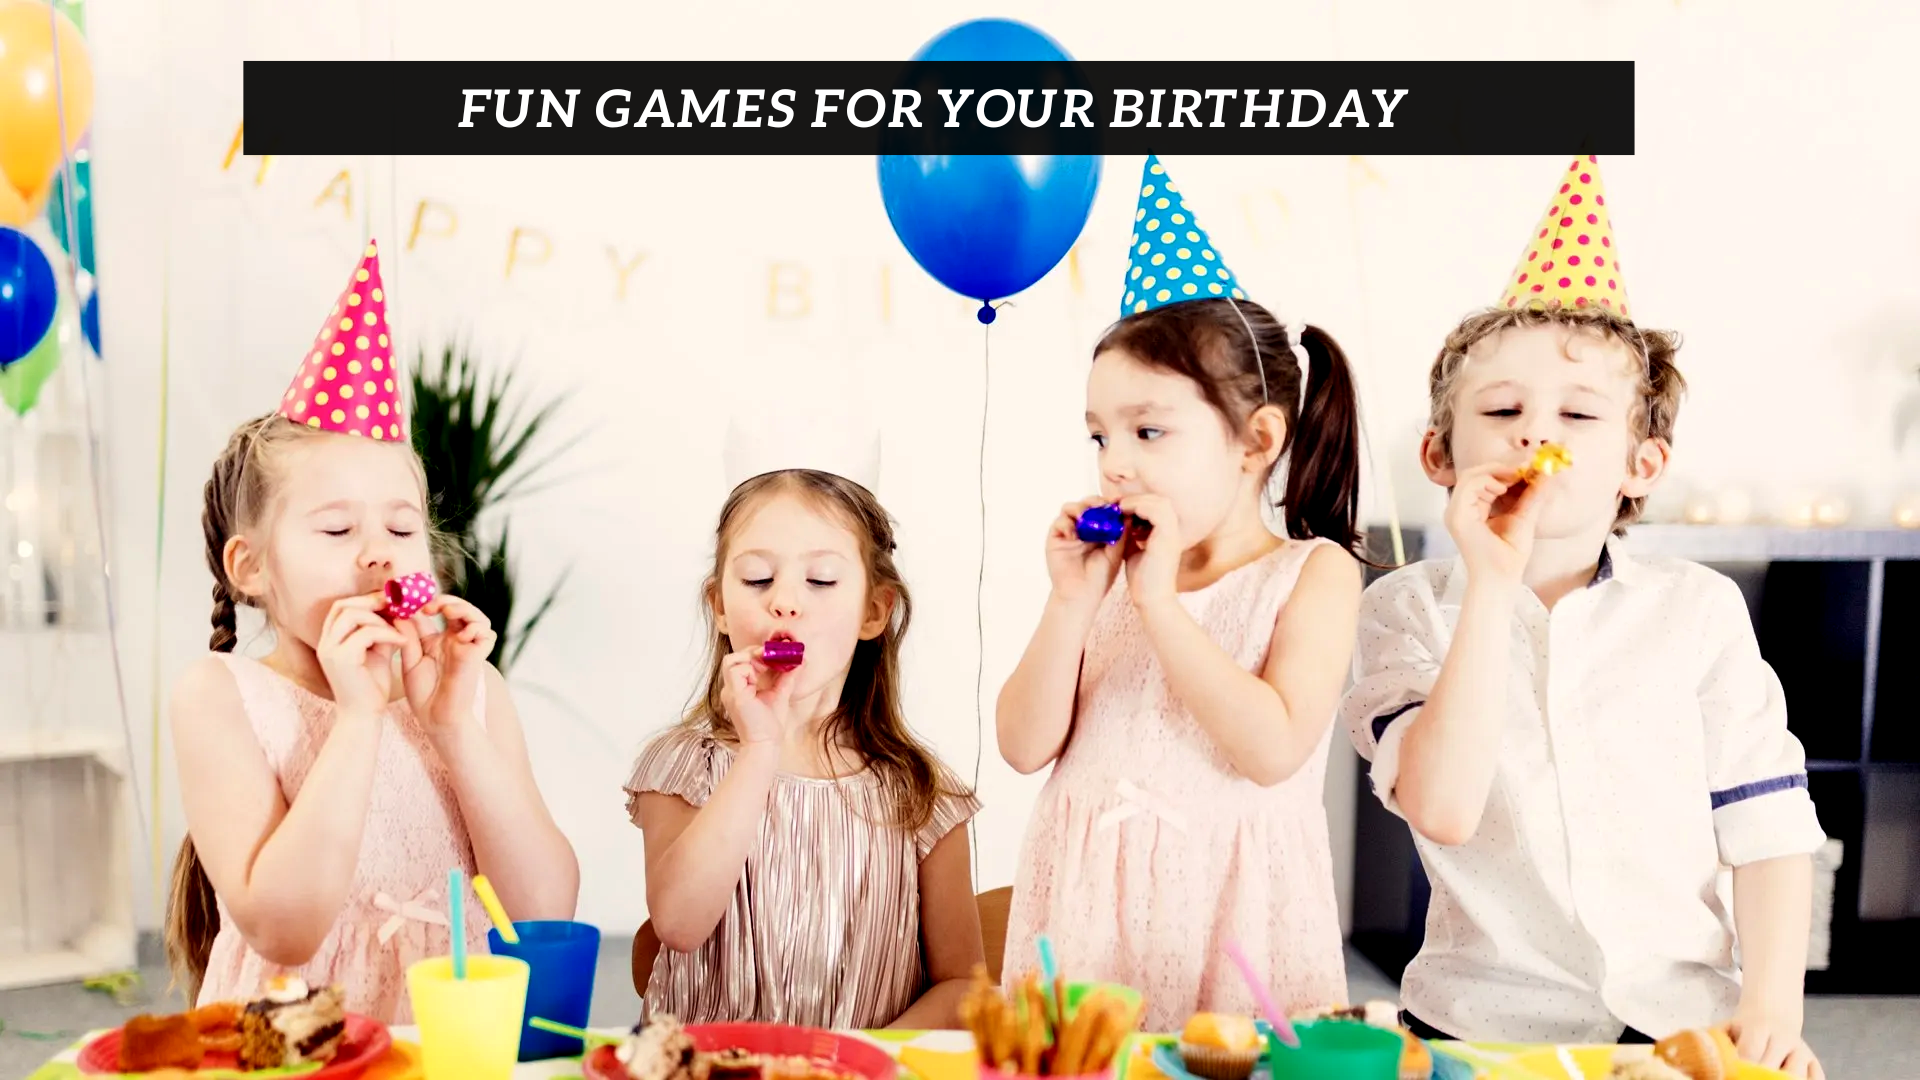 Fun Games For Your Birthday